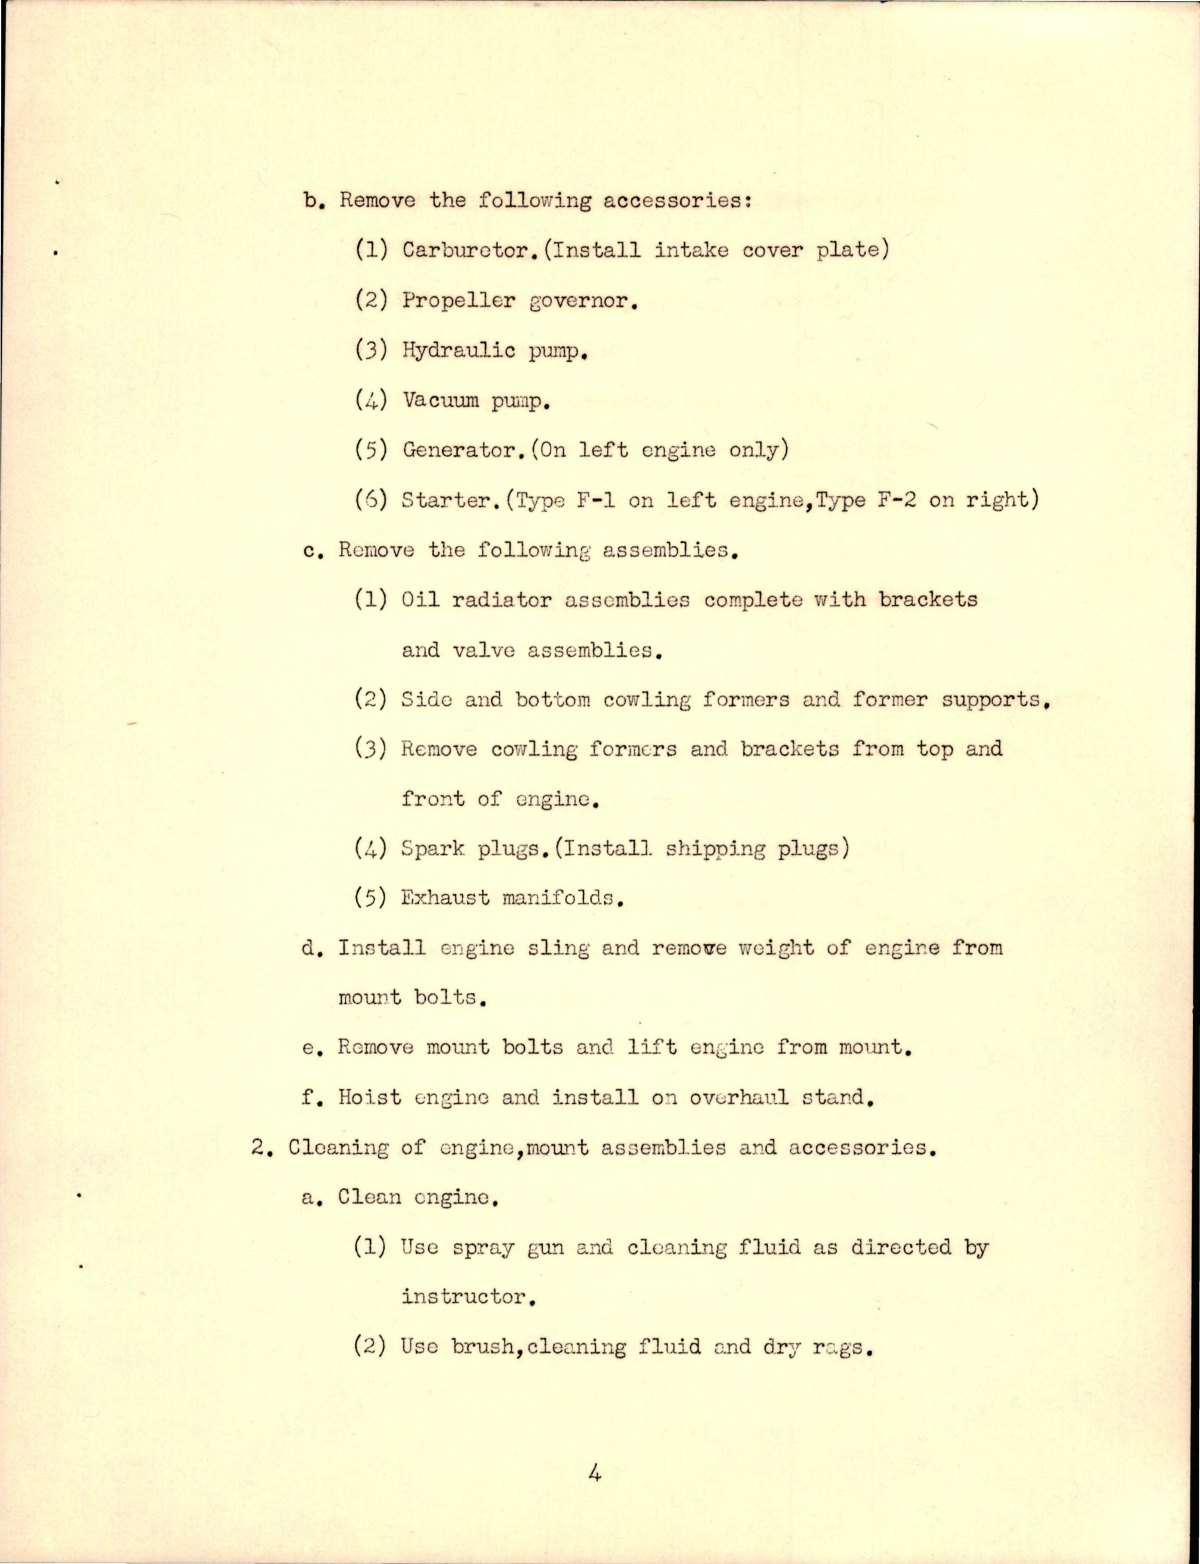 Sample page 5 from AirCorps Library document: Project Guide for Disassembly of V-1710-27 and -29 Engines and Mount Assemblies, Cleaning, Inspecting and Disposition of Equipment  